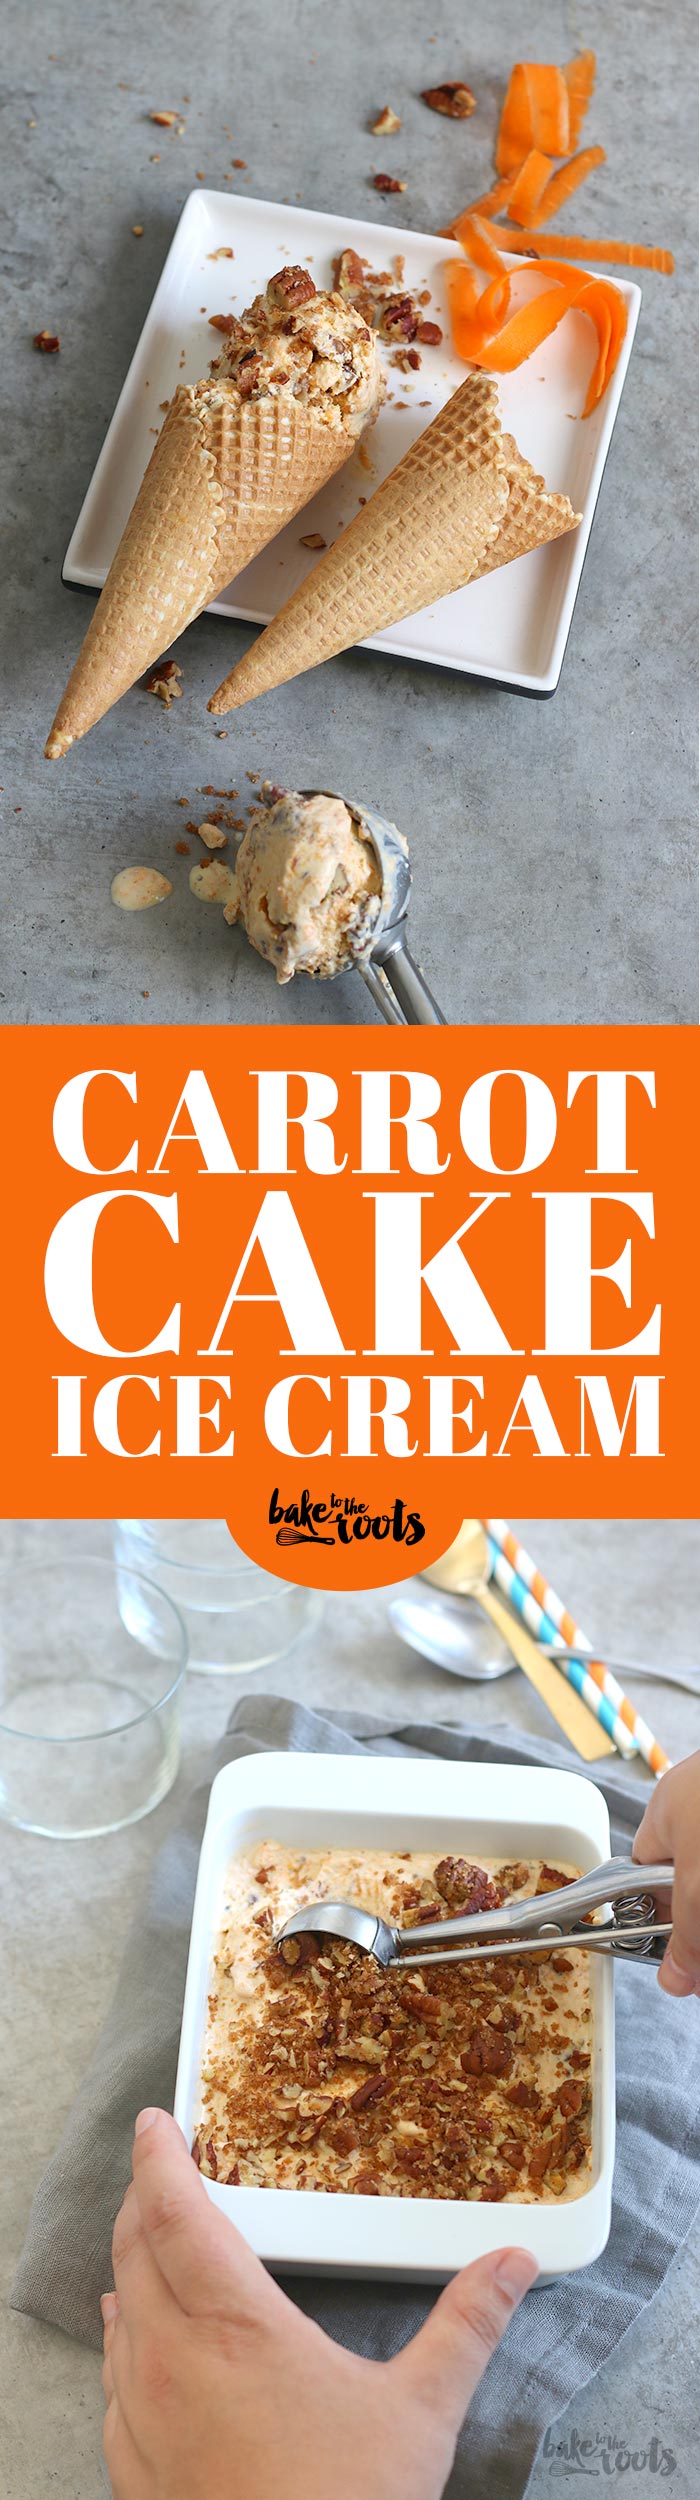 Carrot Cake Ice Cream | Bake to the roots